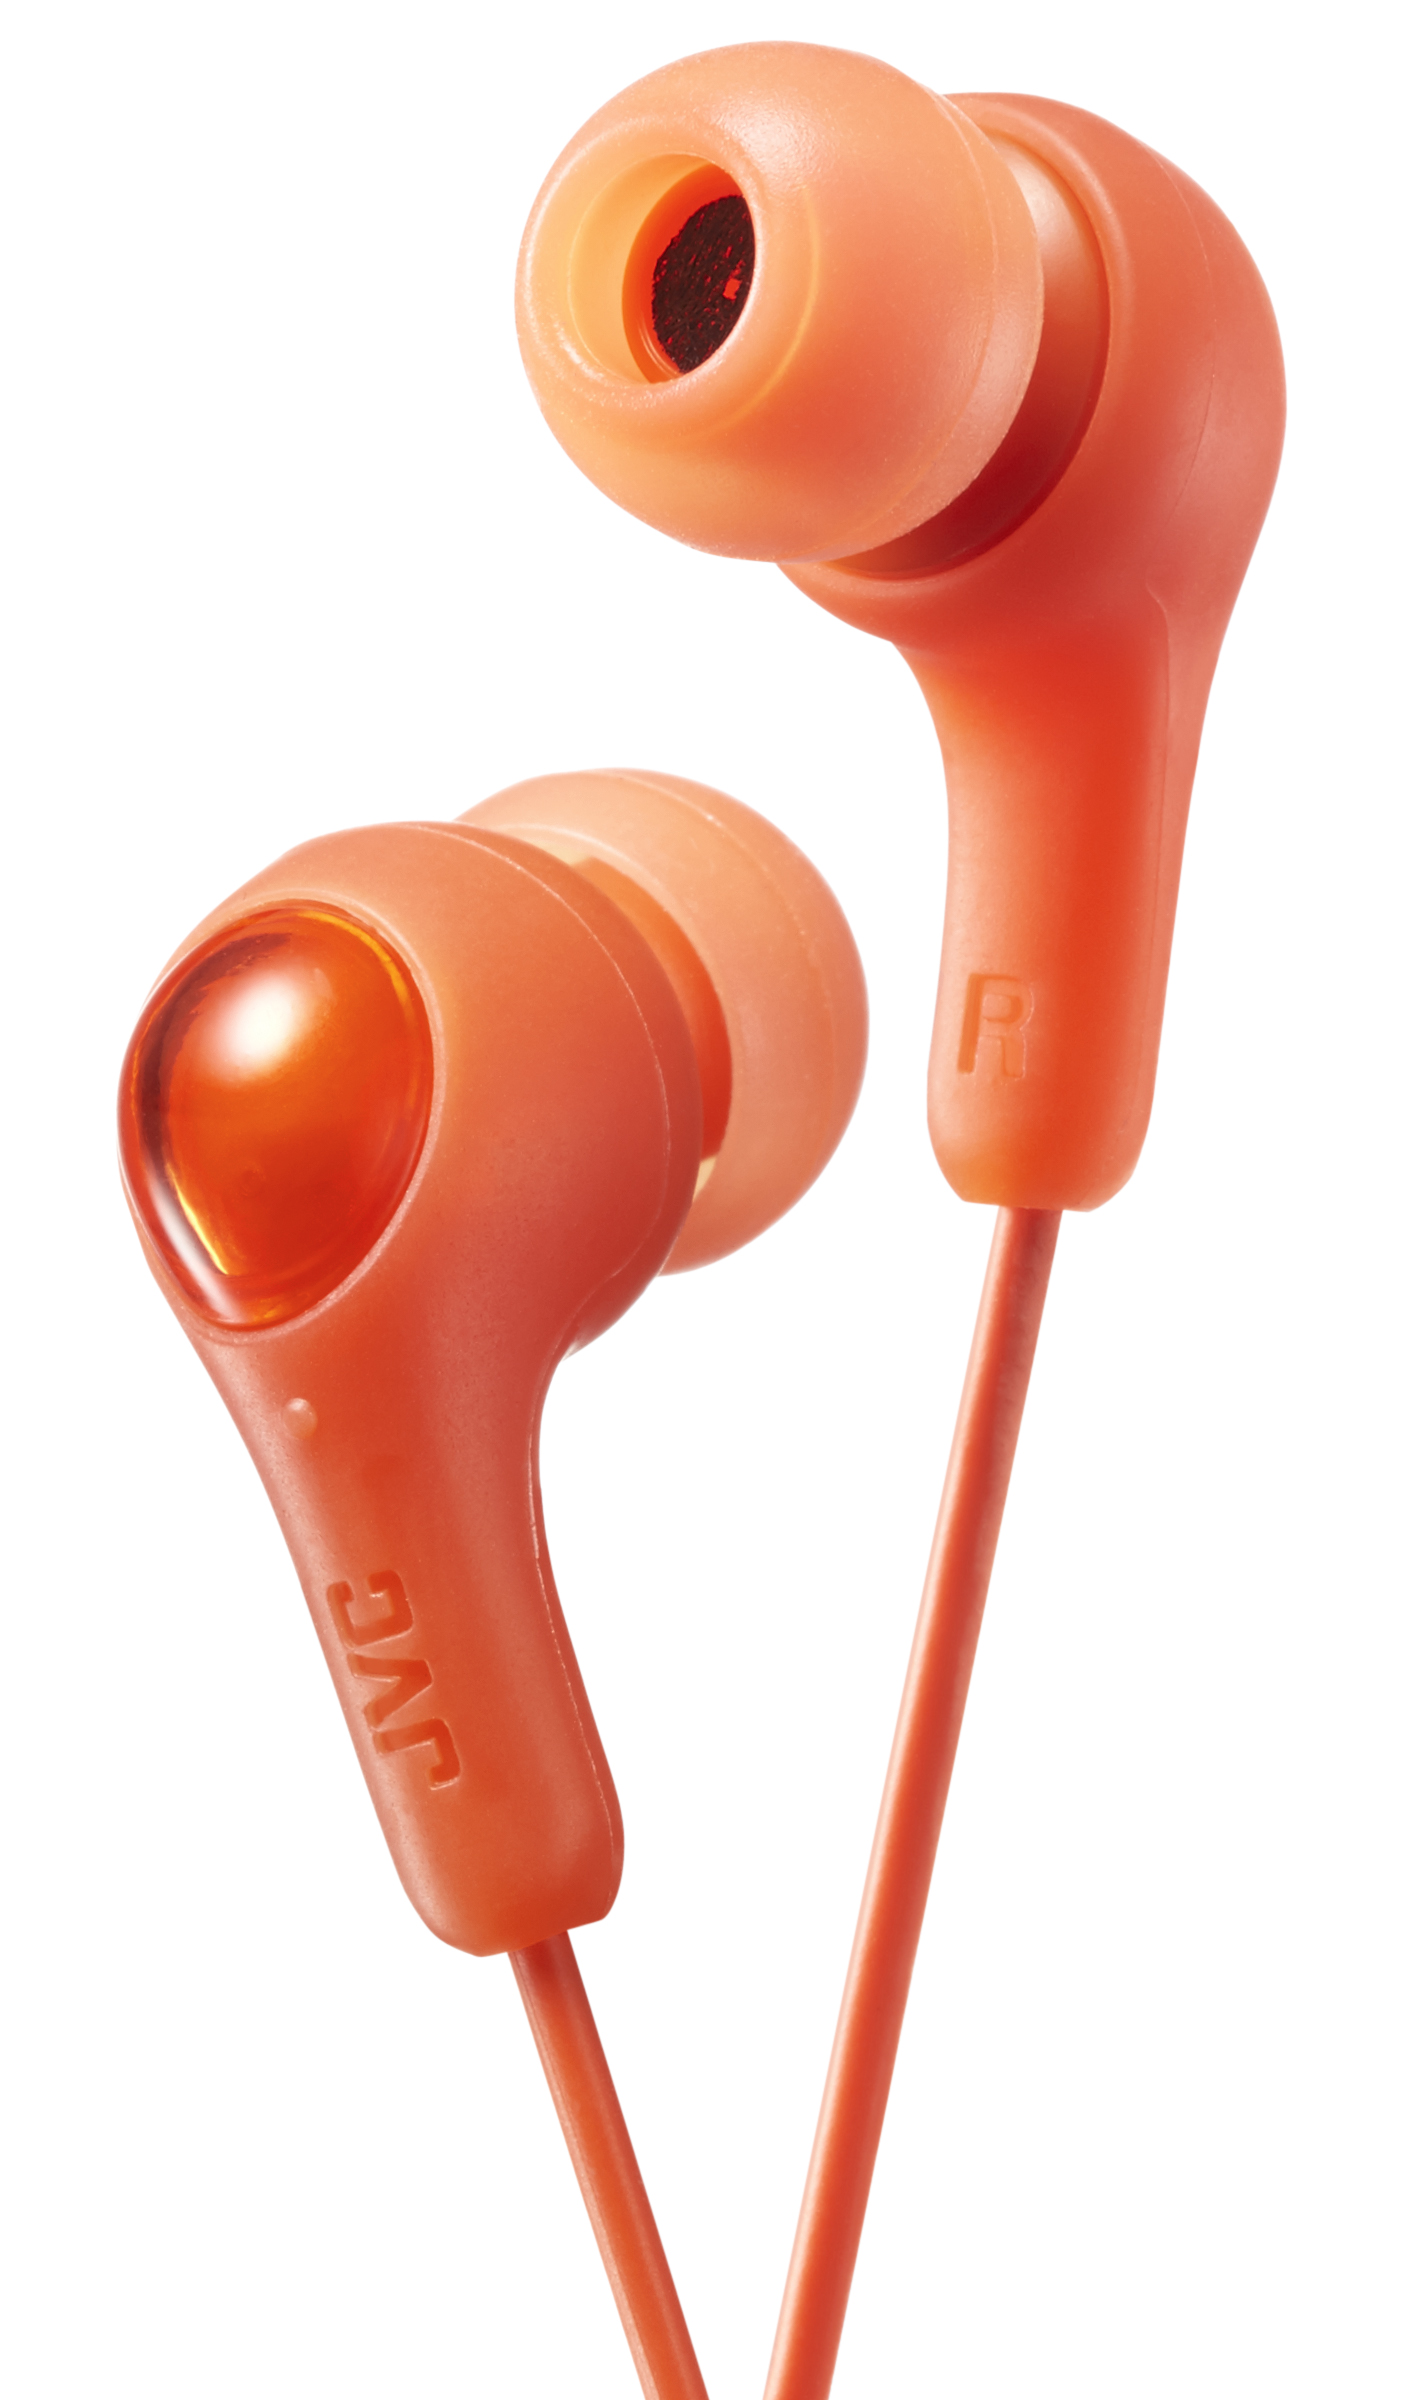 JVC Gumy In Ear Earbud Headphones, Powerful Sound, Comfortable and Secure Fit - HAFX7D (Orange) - image 1 of 2